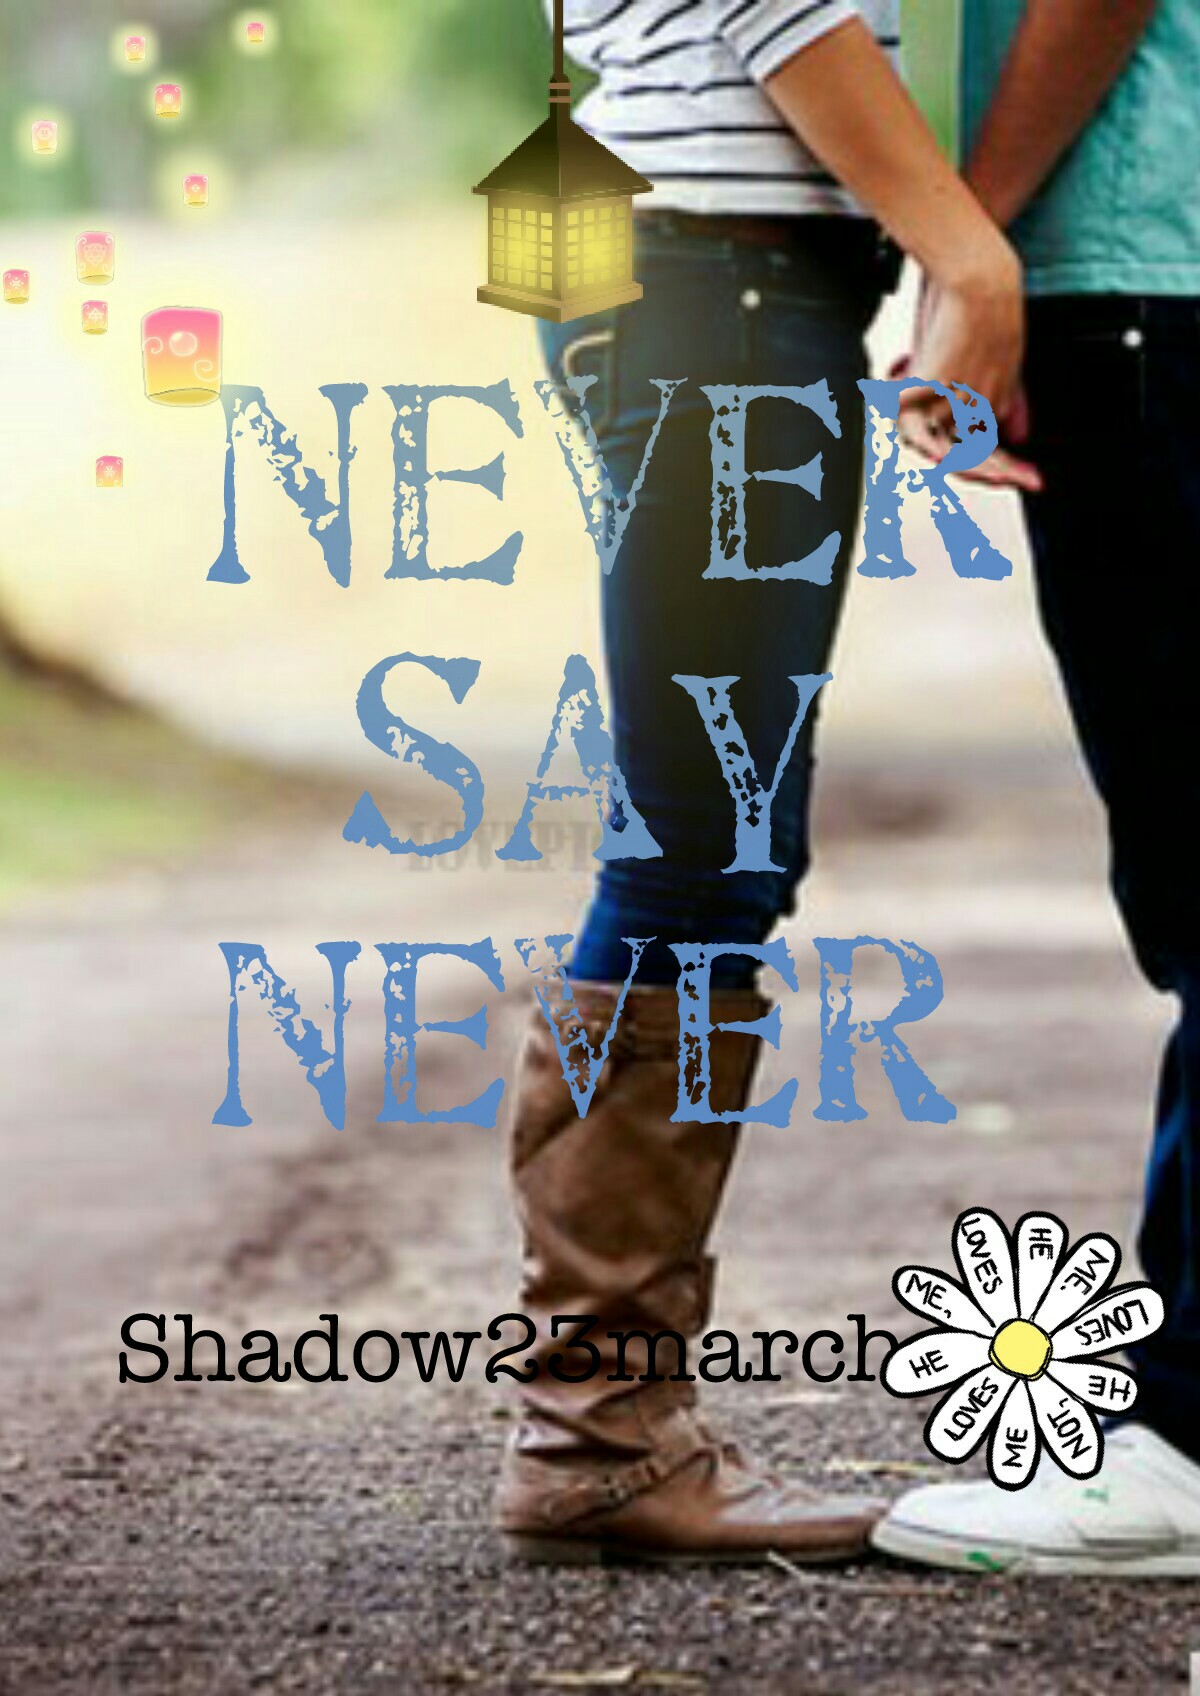 Tap!
This is another cover for a story in writing on Wattpad.comecheck it out there, my profile name is Shadow23march! It is a fairly clique BadboyxNerd story but I hope you enjoy it anyways!